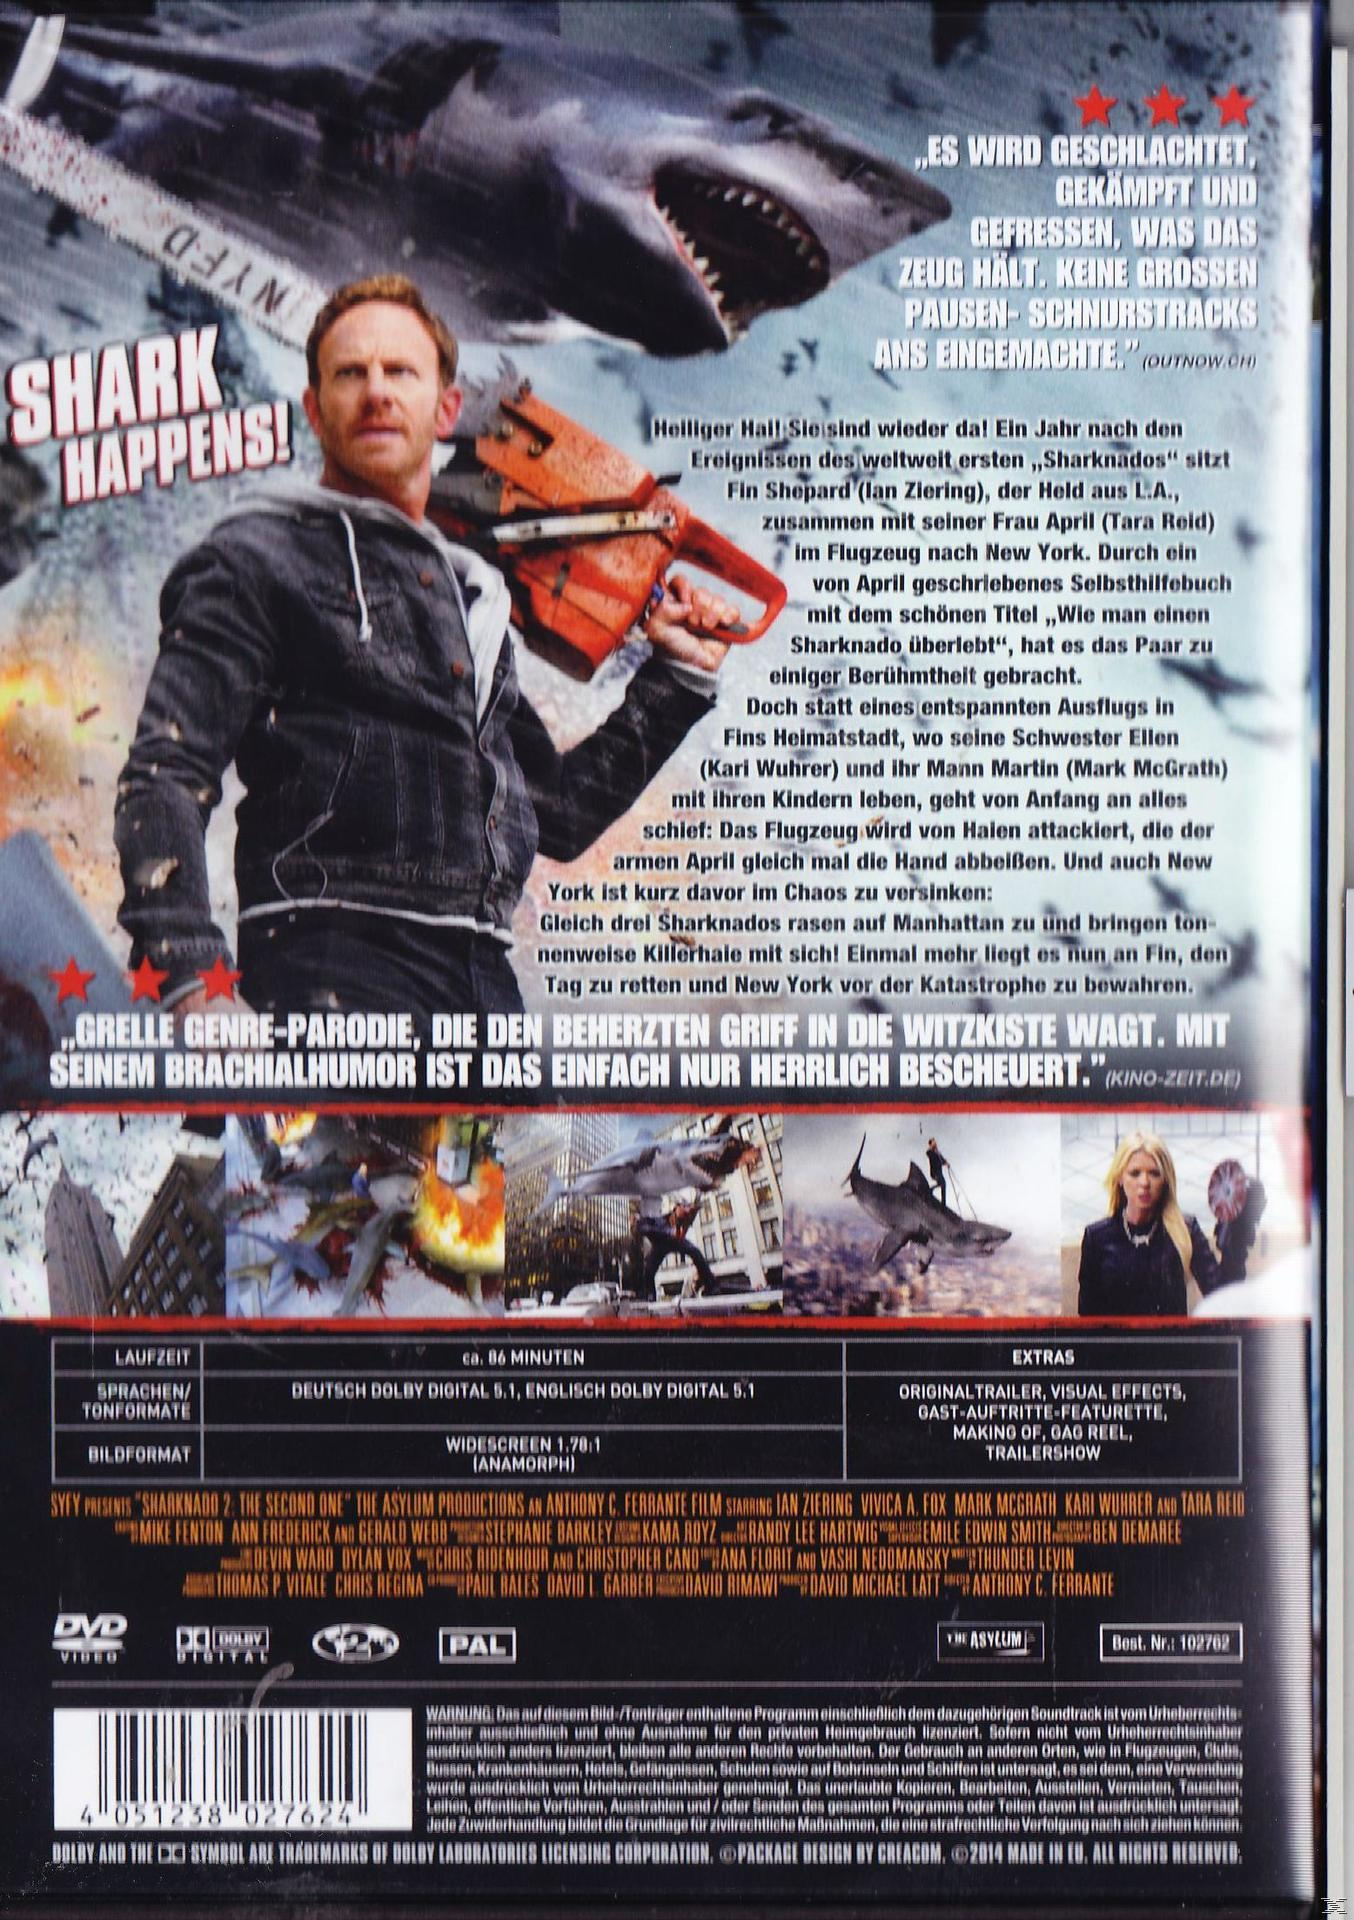 Sharknado 2 - The DVD Second One